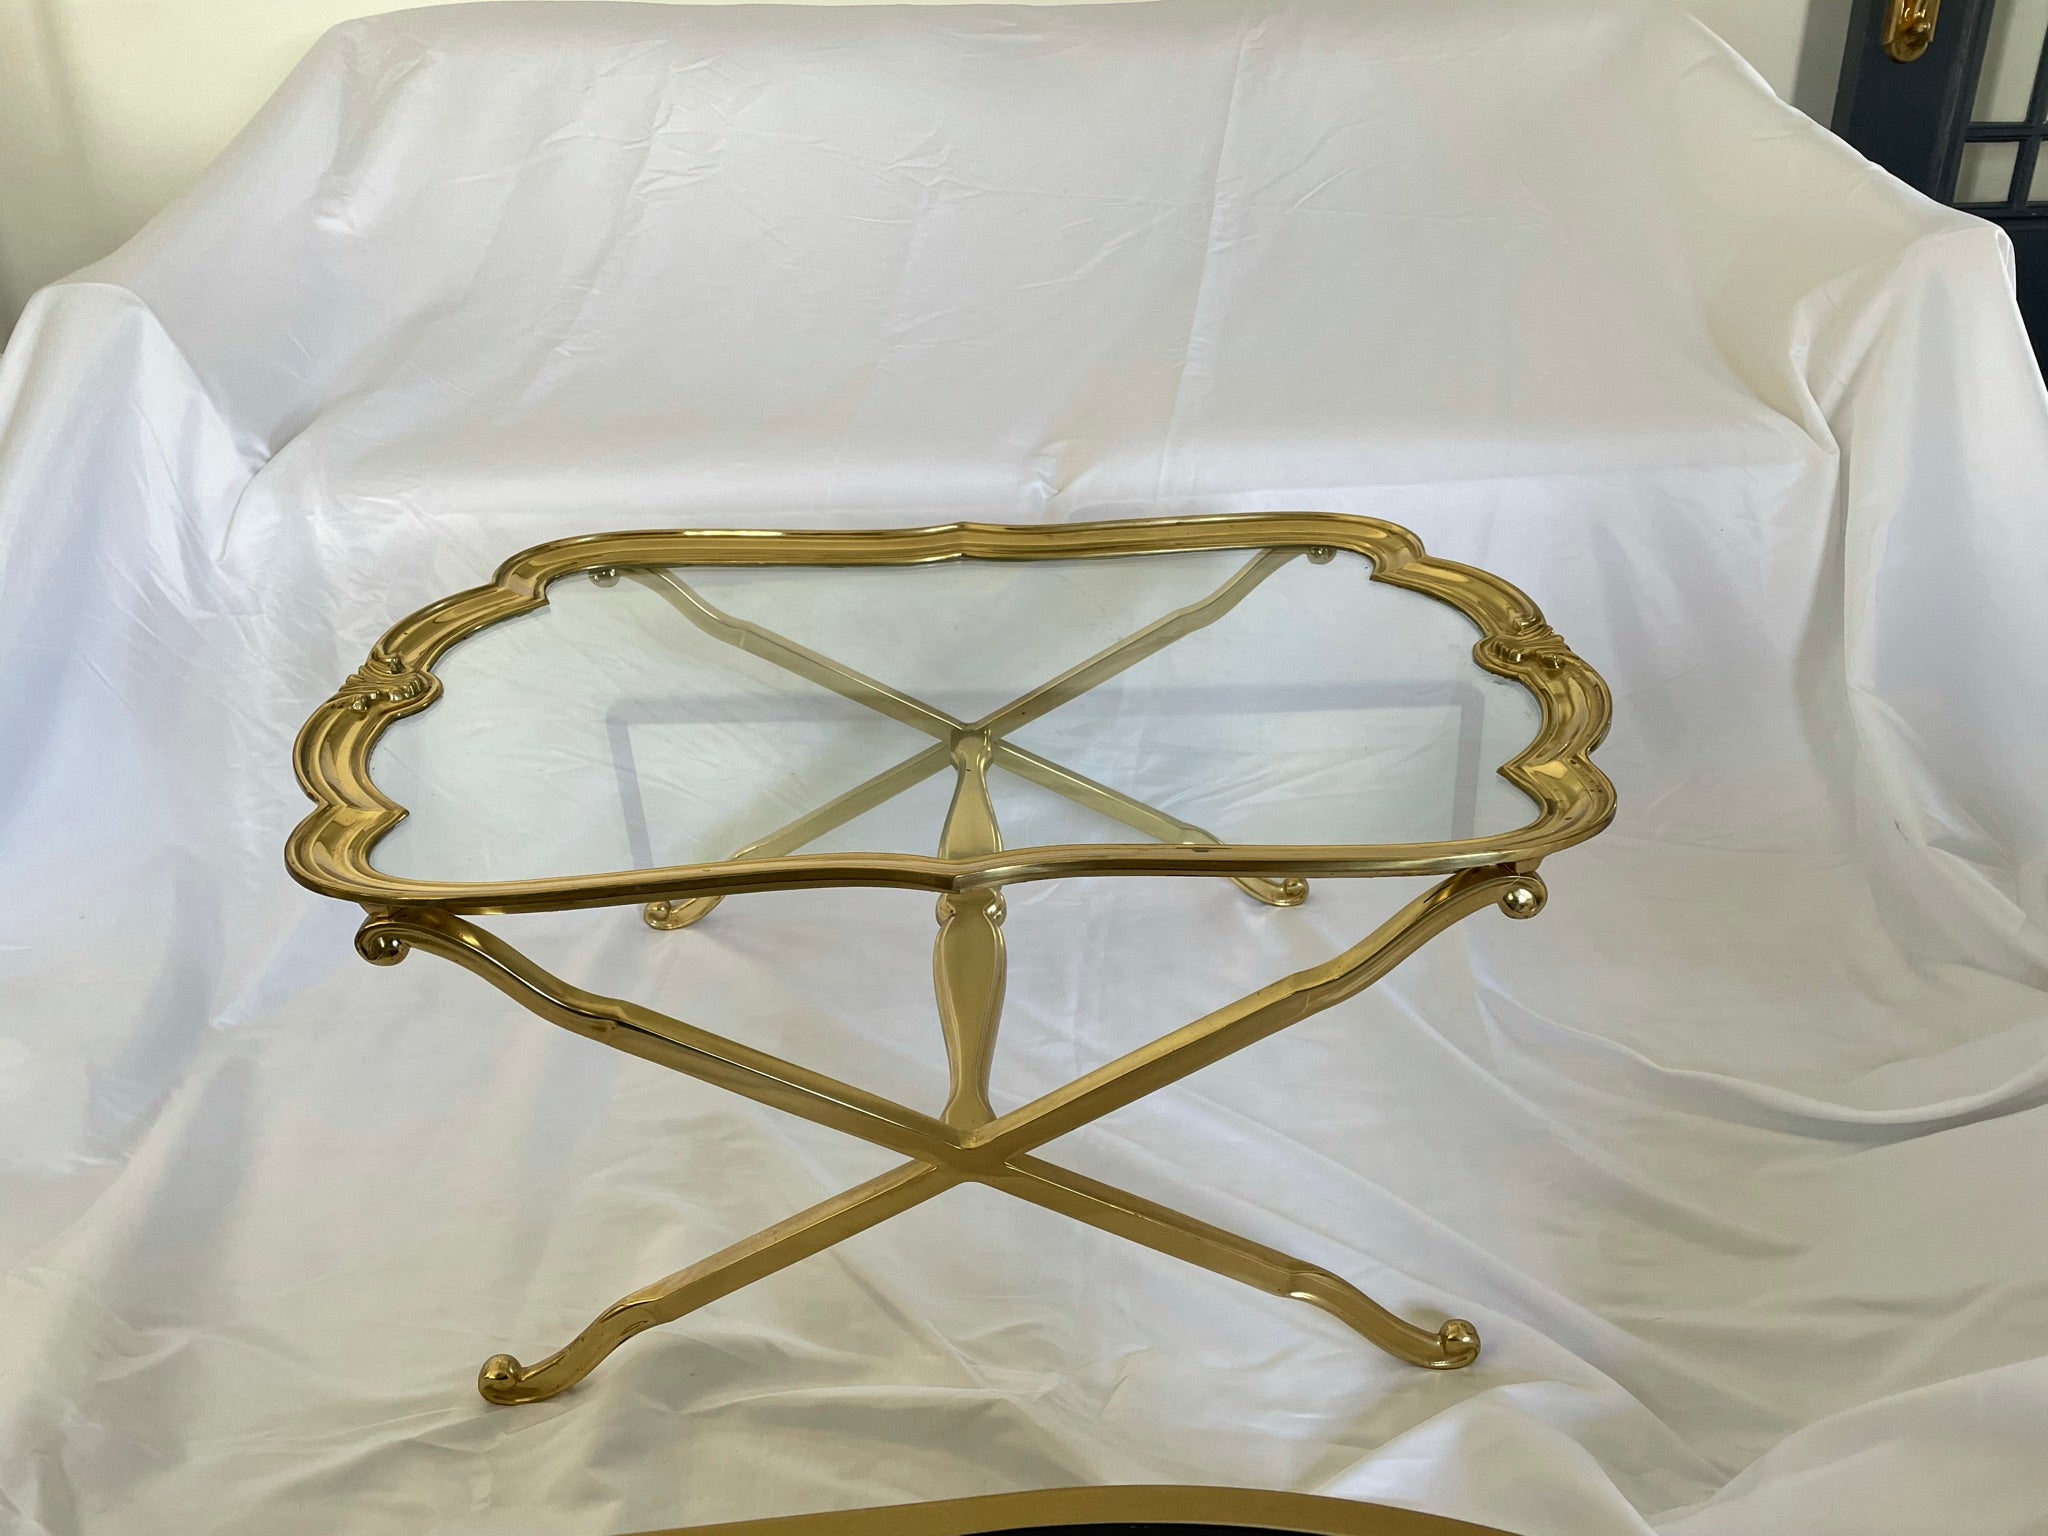 Stunning brass and glass coffee or drinks table. Scalloped Edge glass top with fleur-de-lis detail. X base. Heavy. In the manner of Baker and LaBarge.